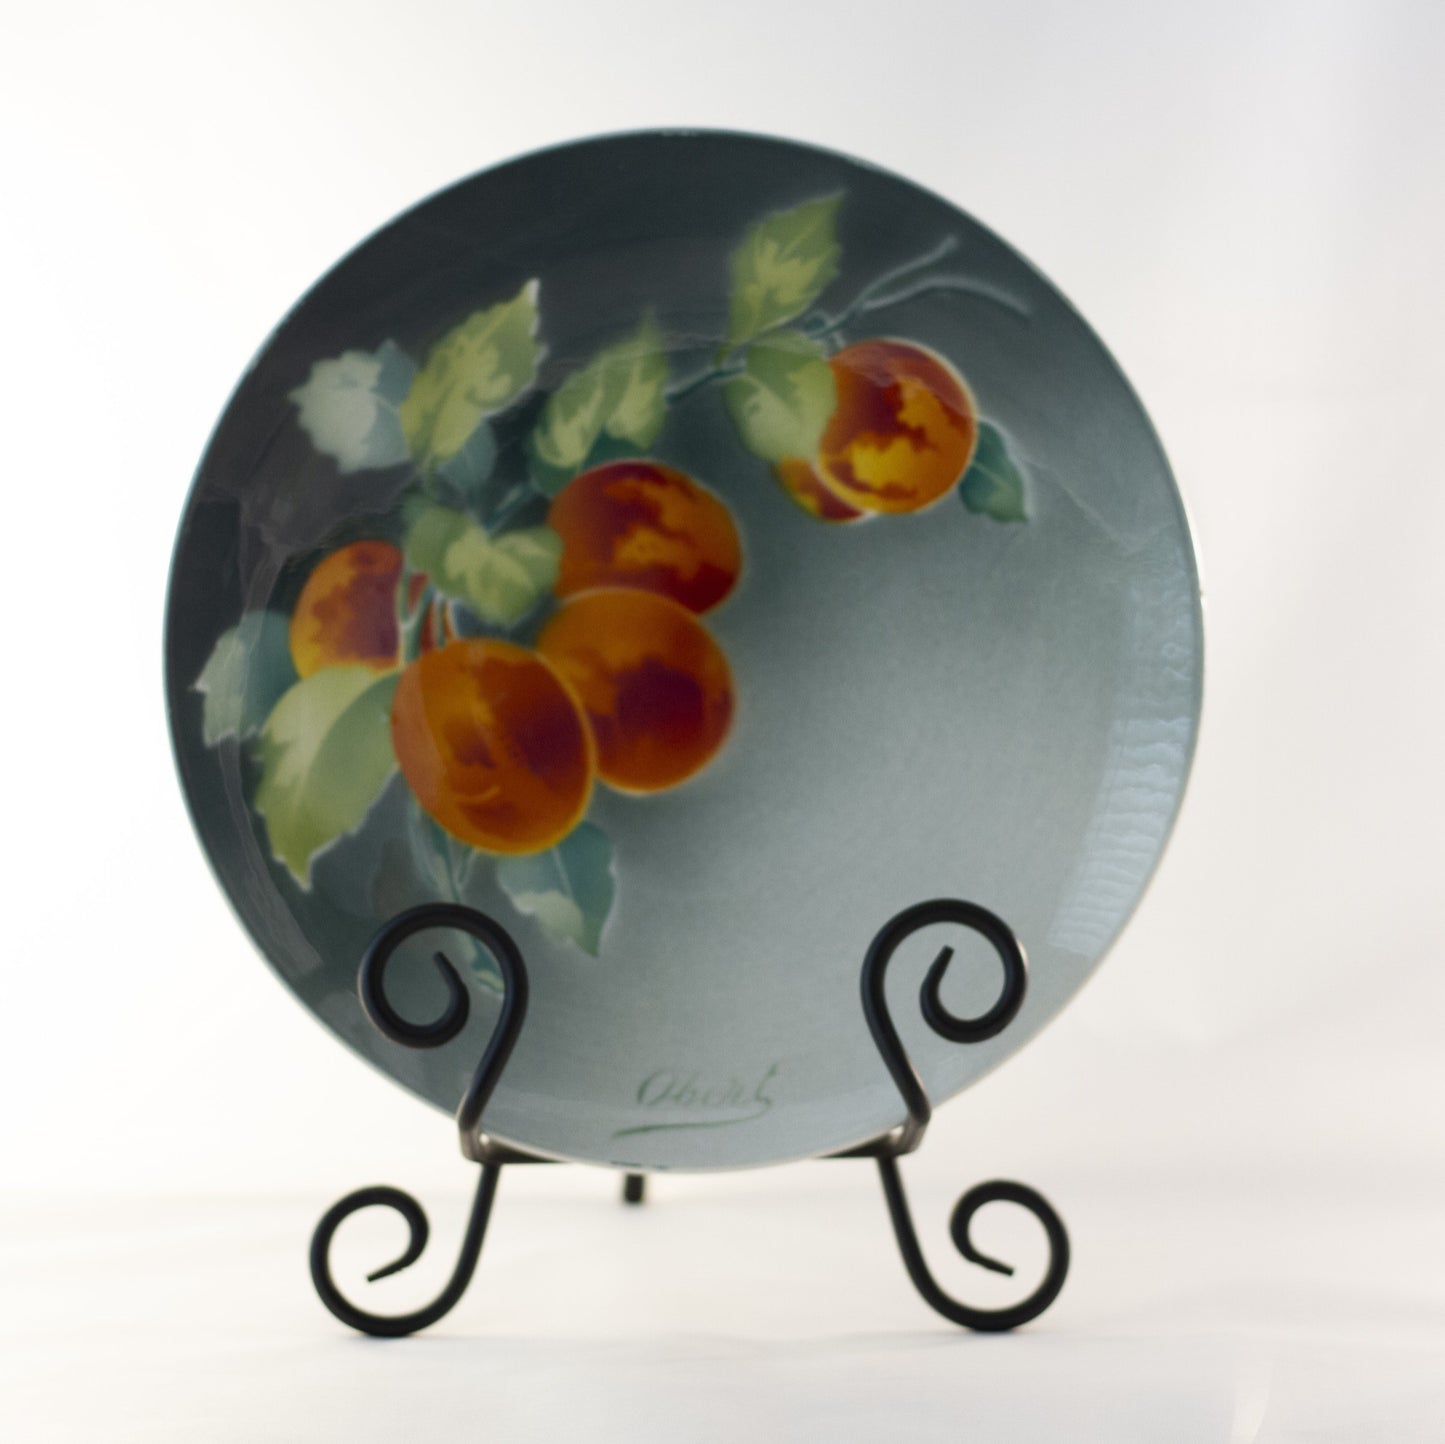 K & G LUNÉVILLE FRENCH FAIENCE PLATE HAND PAINTED APRICOTS 8 ½” Signed Obert Circa 1900